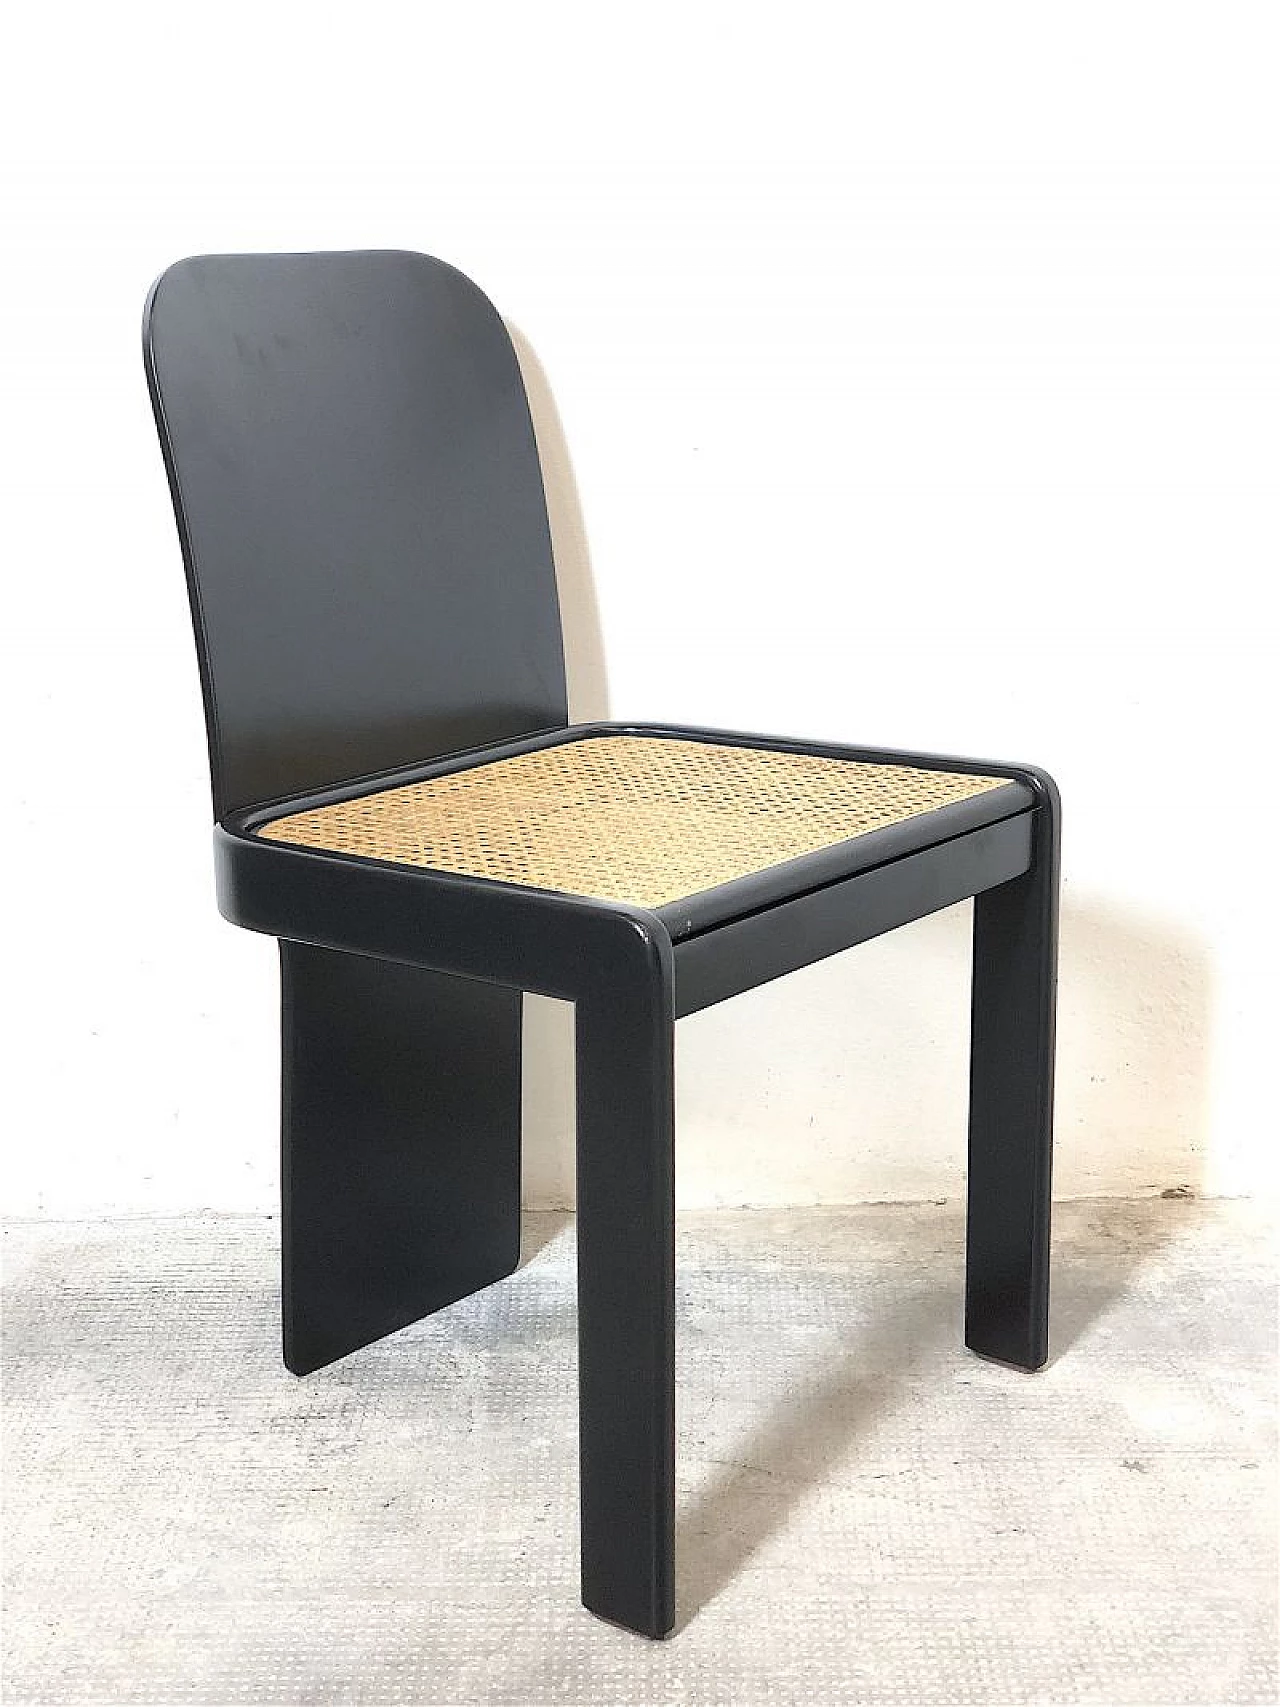 4 Chairs by Pierluigi Molinari for Pozzi and game table by Cini & Nils, 1970s 9